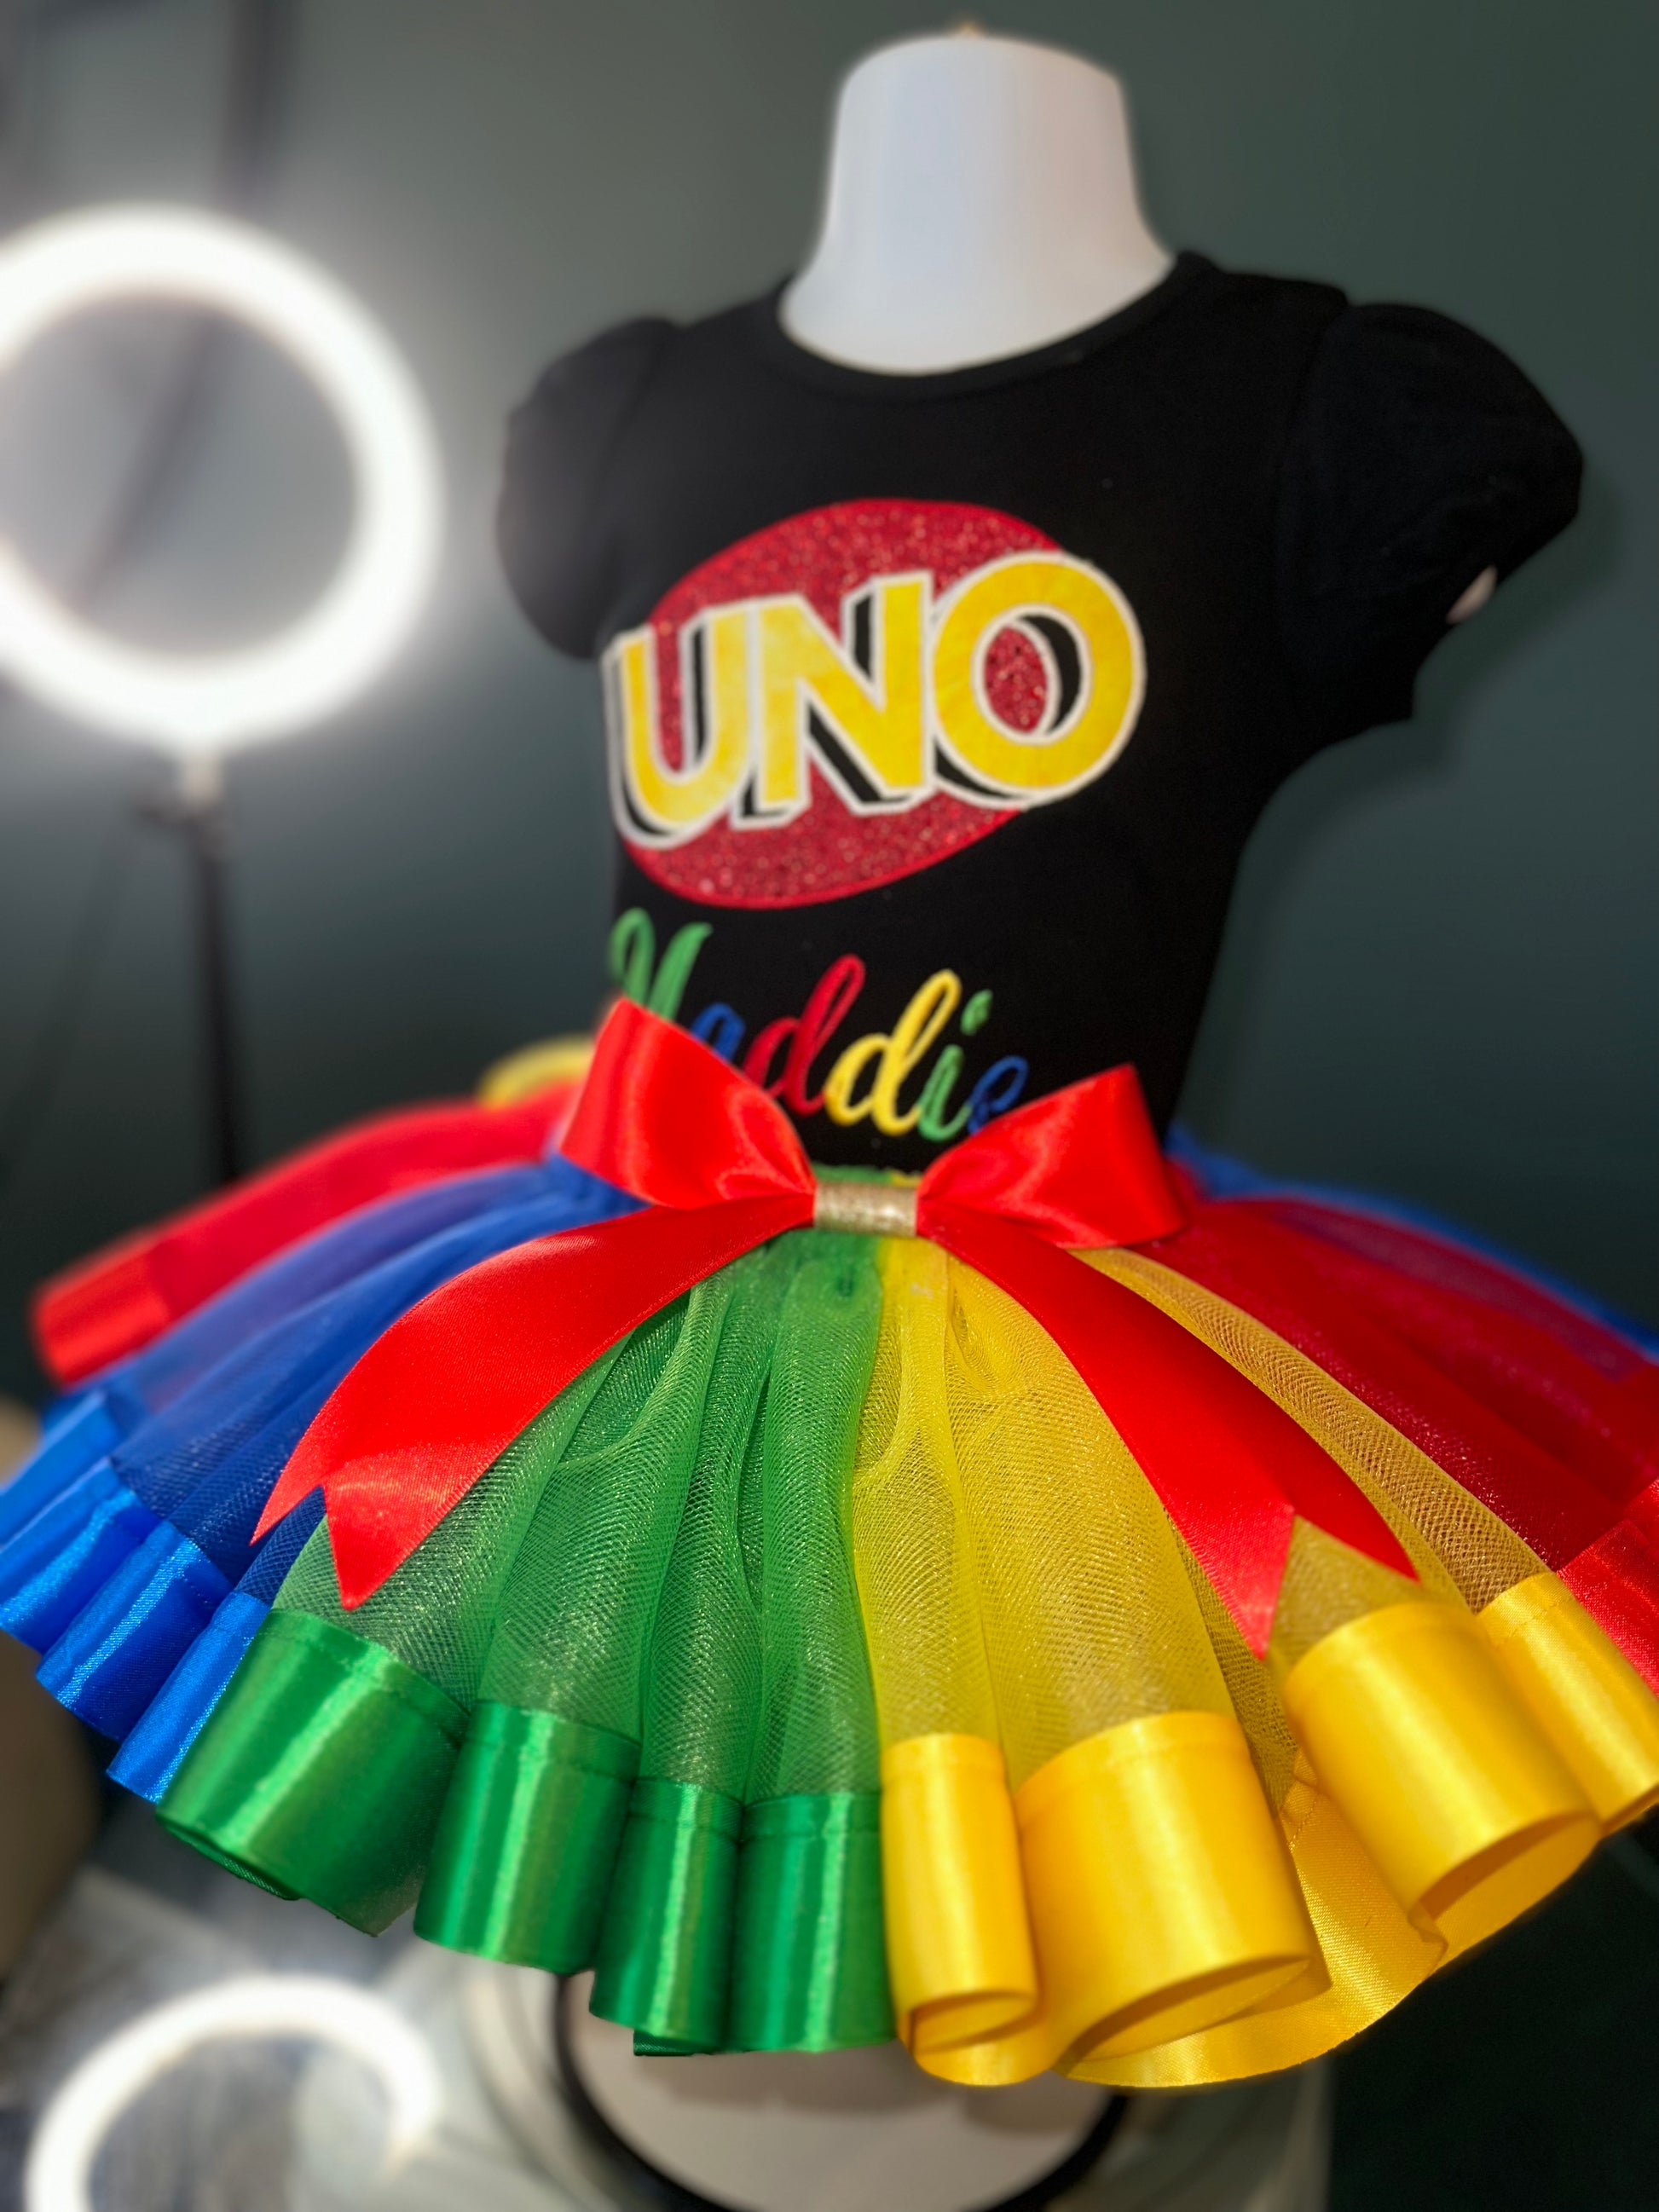 uno theme birthday outfit. personalized embroidery. black puff sleeve shirt and matching multi colored tulle skirt with waist bow